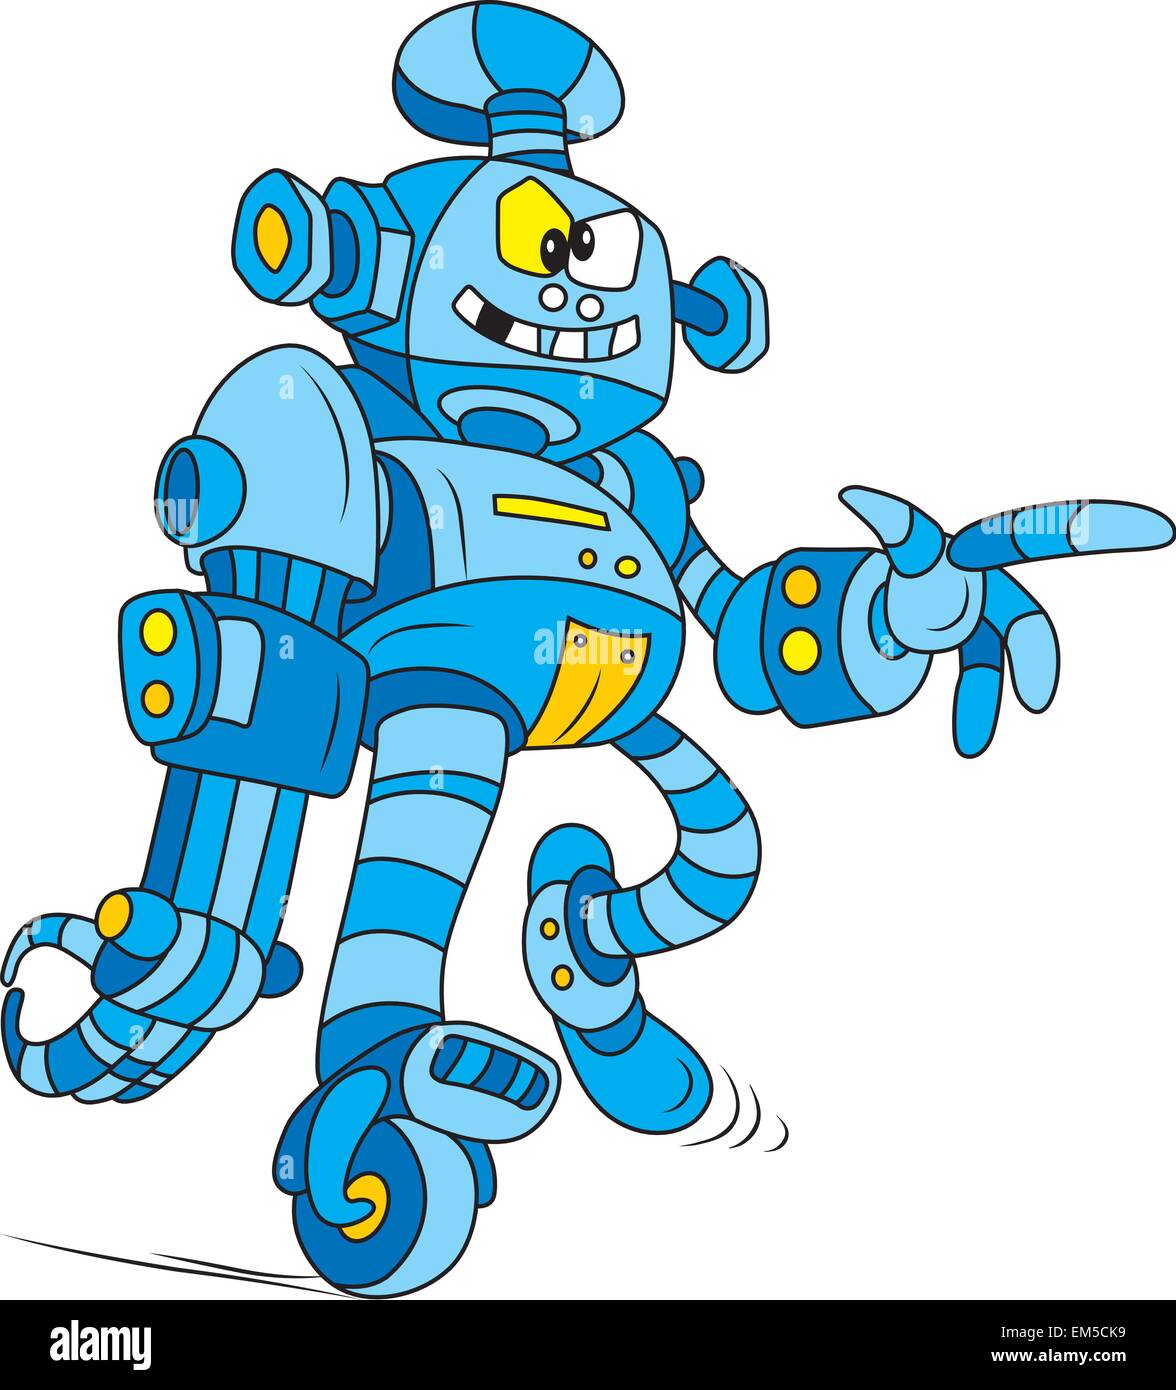 Vector illustration of Crazy blue robot character Stock Vector